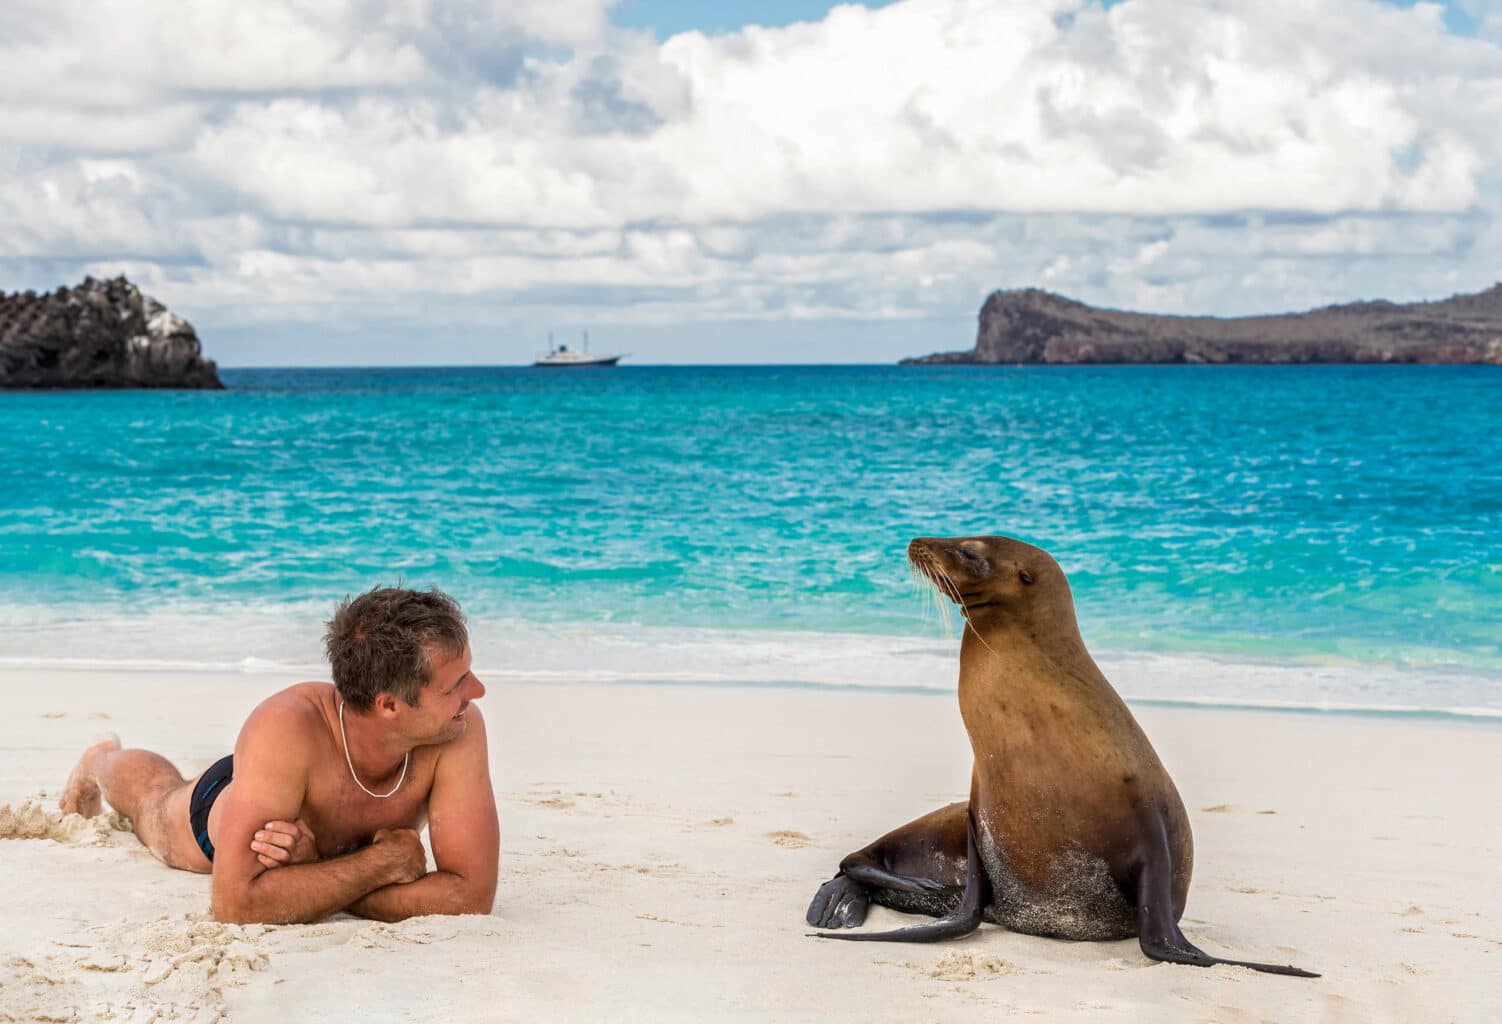 A man alongside a sea lion on a shore of a beach in the Galapagos Islands.